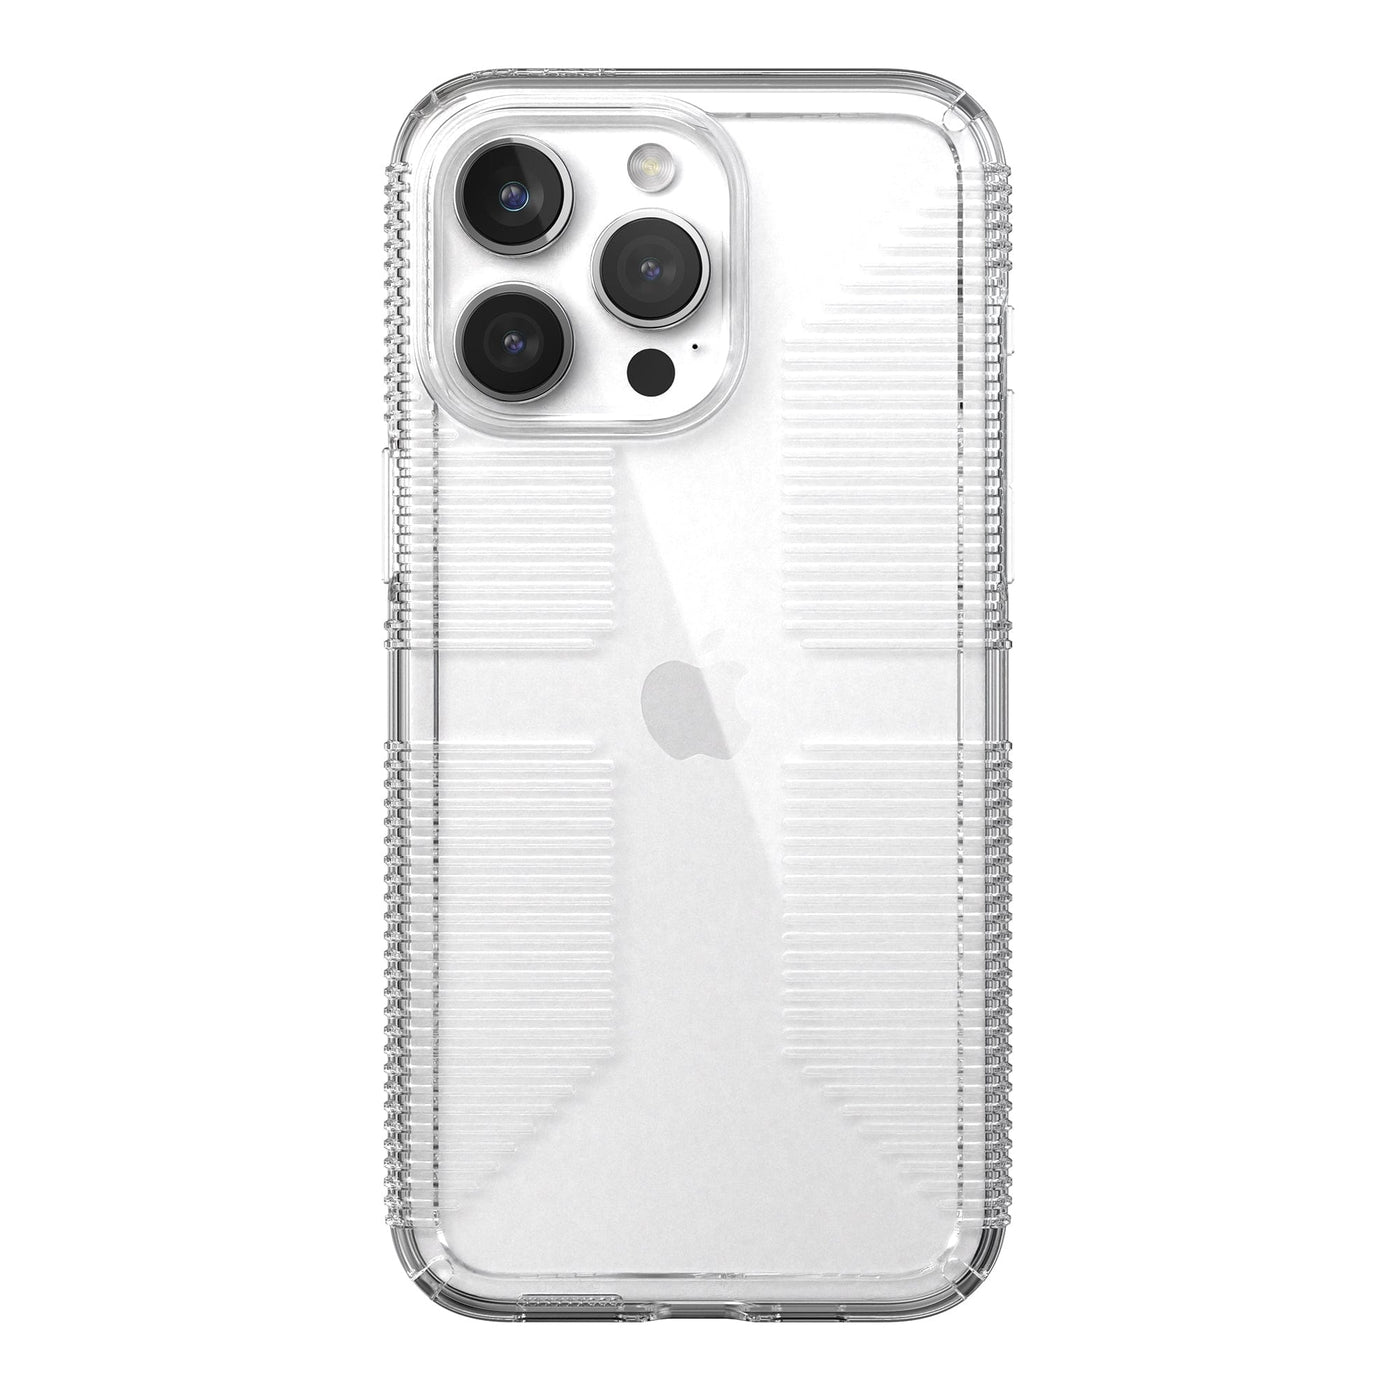 GemShell Grip iPhone 15 Pro Max Cases